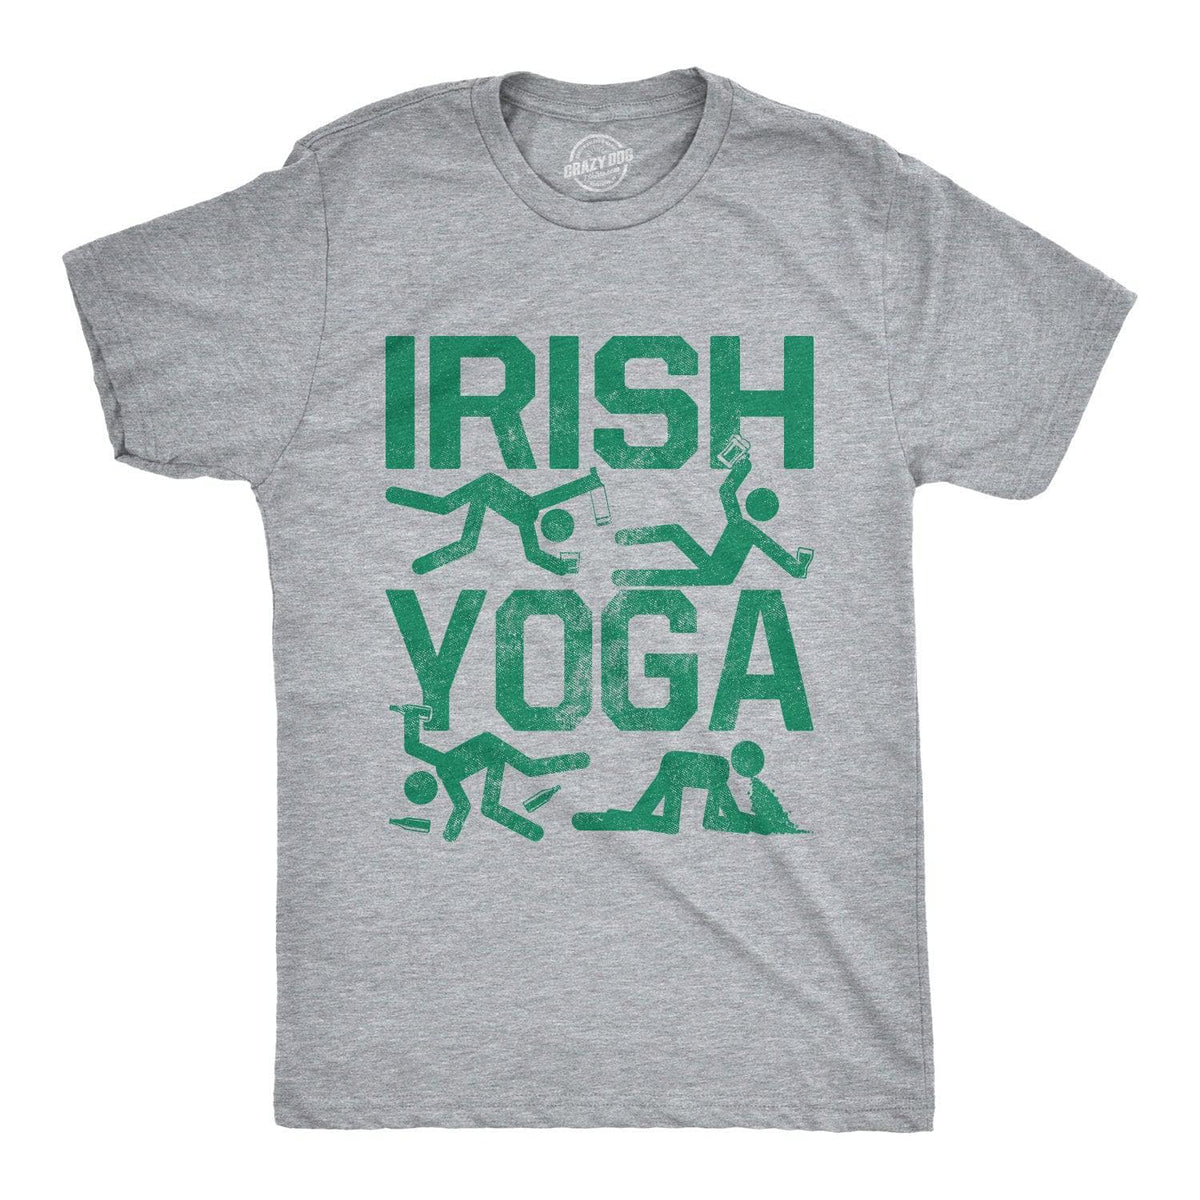 Irish Yoga St Patrick's Day Men's T-Shirt by Spreadshirt, S, bright green :  : Clothing, Shoes & Accessories